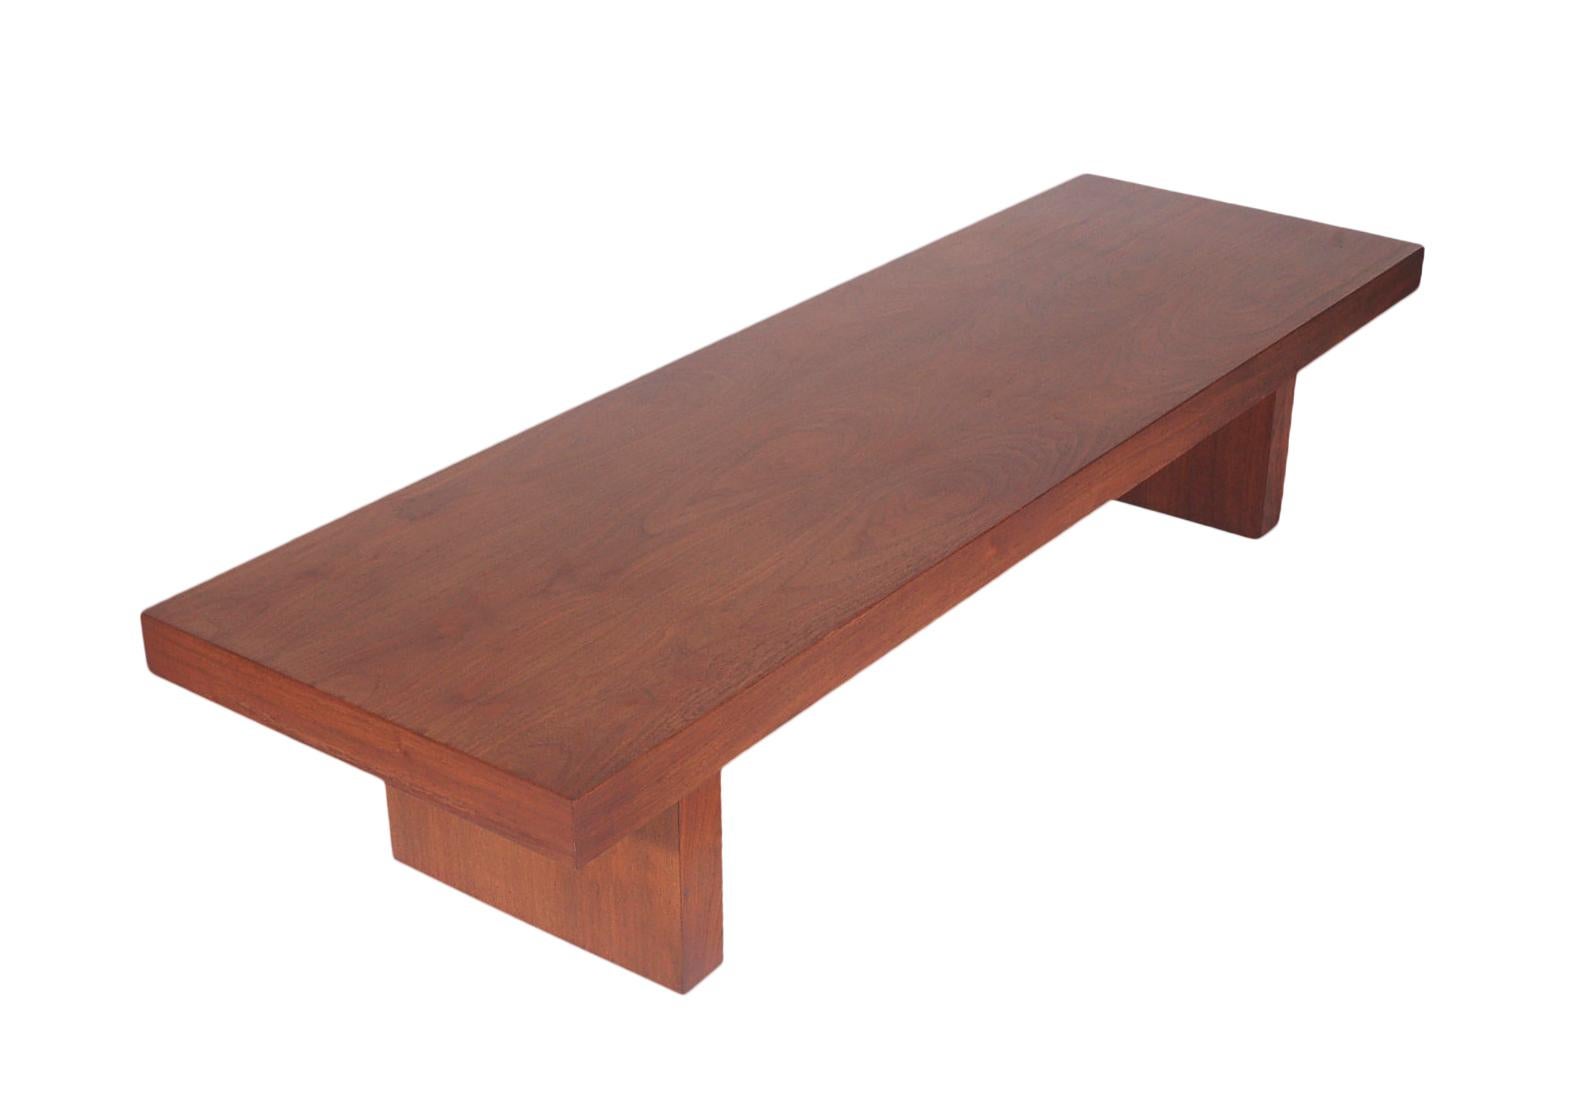 Mid-20th Century Mid-Century Modern Long Bench or Coffee Table by Showpieces Inc. in Walnut For Sale